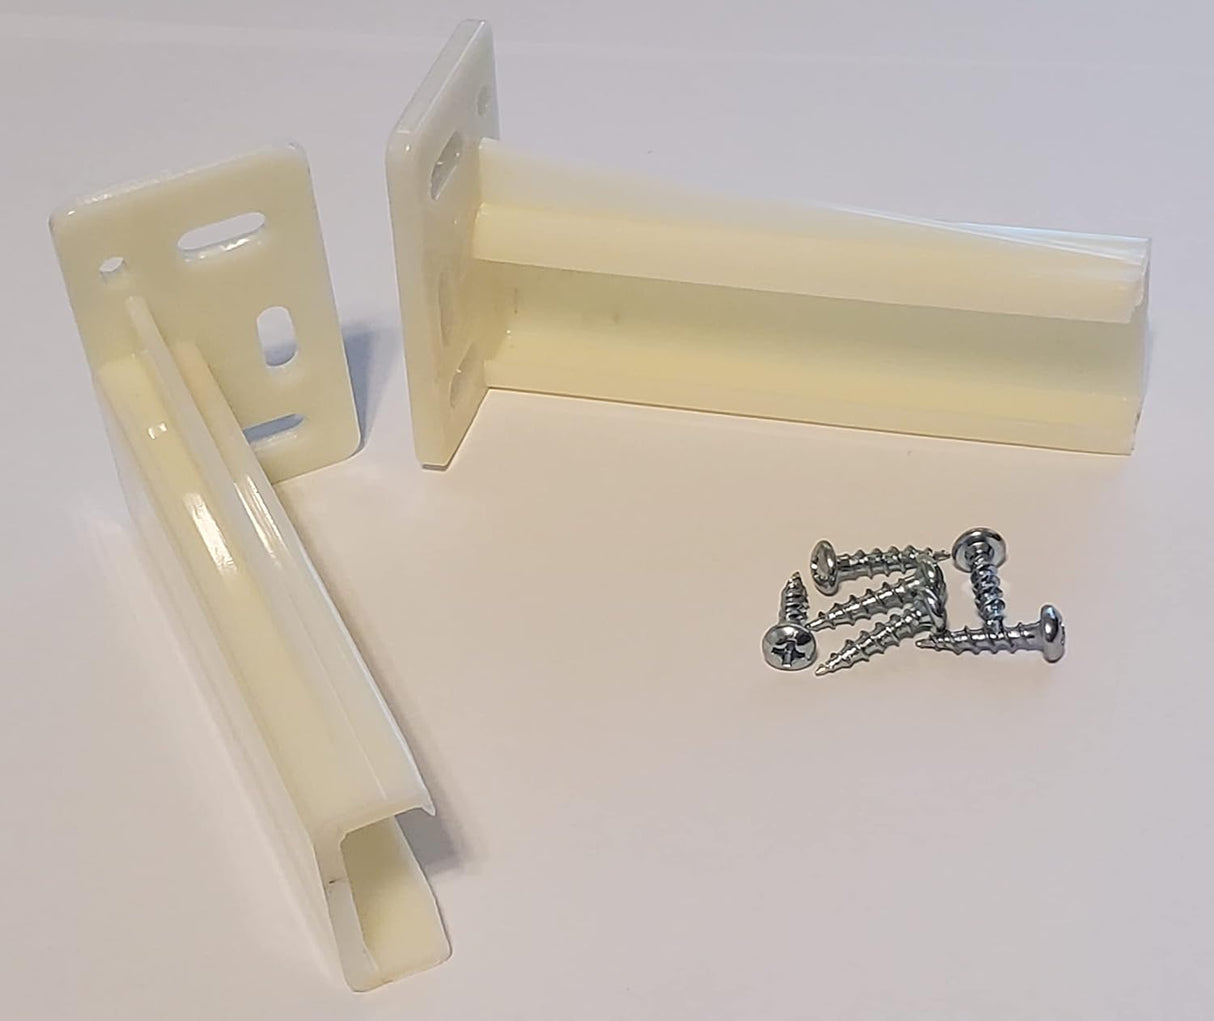 One Pair HR9000RL Rear Drawer Track Socket Mounting Back Plates Brackets, Plastic, White - Sold in Pair (Left and Right)